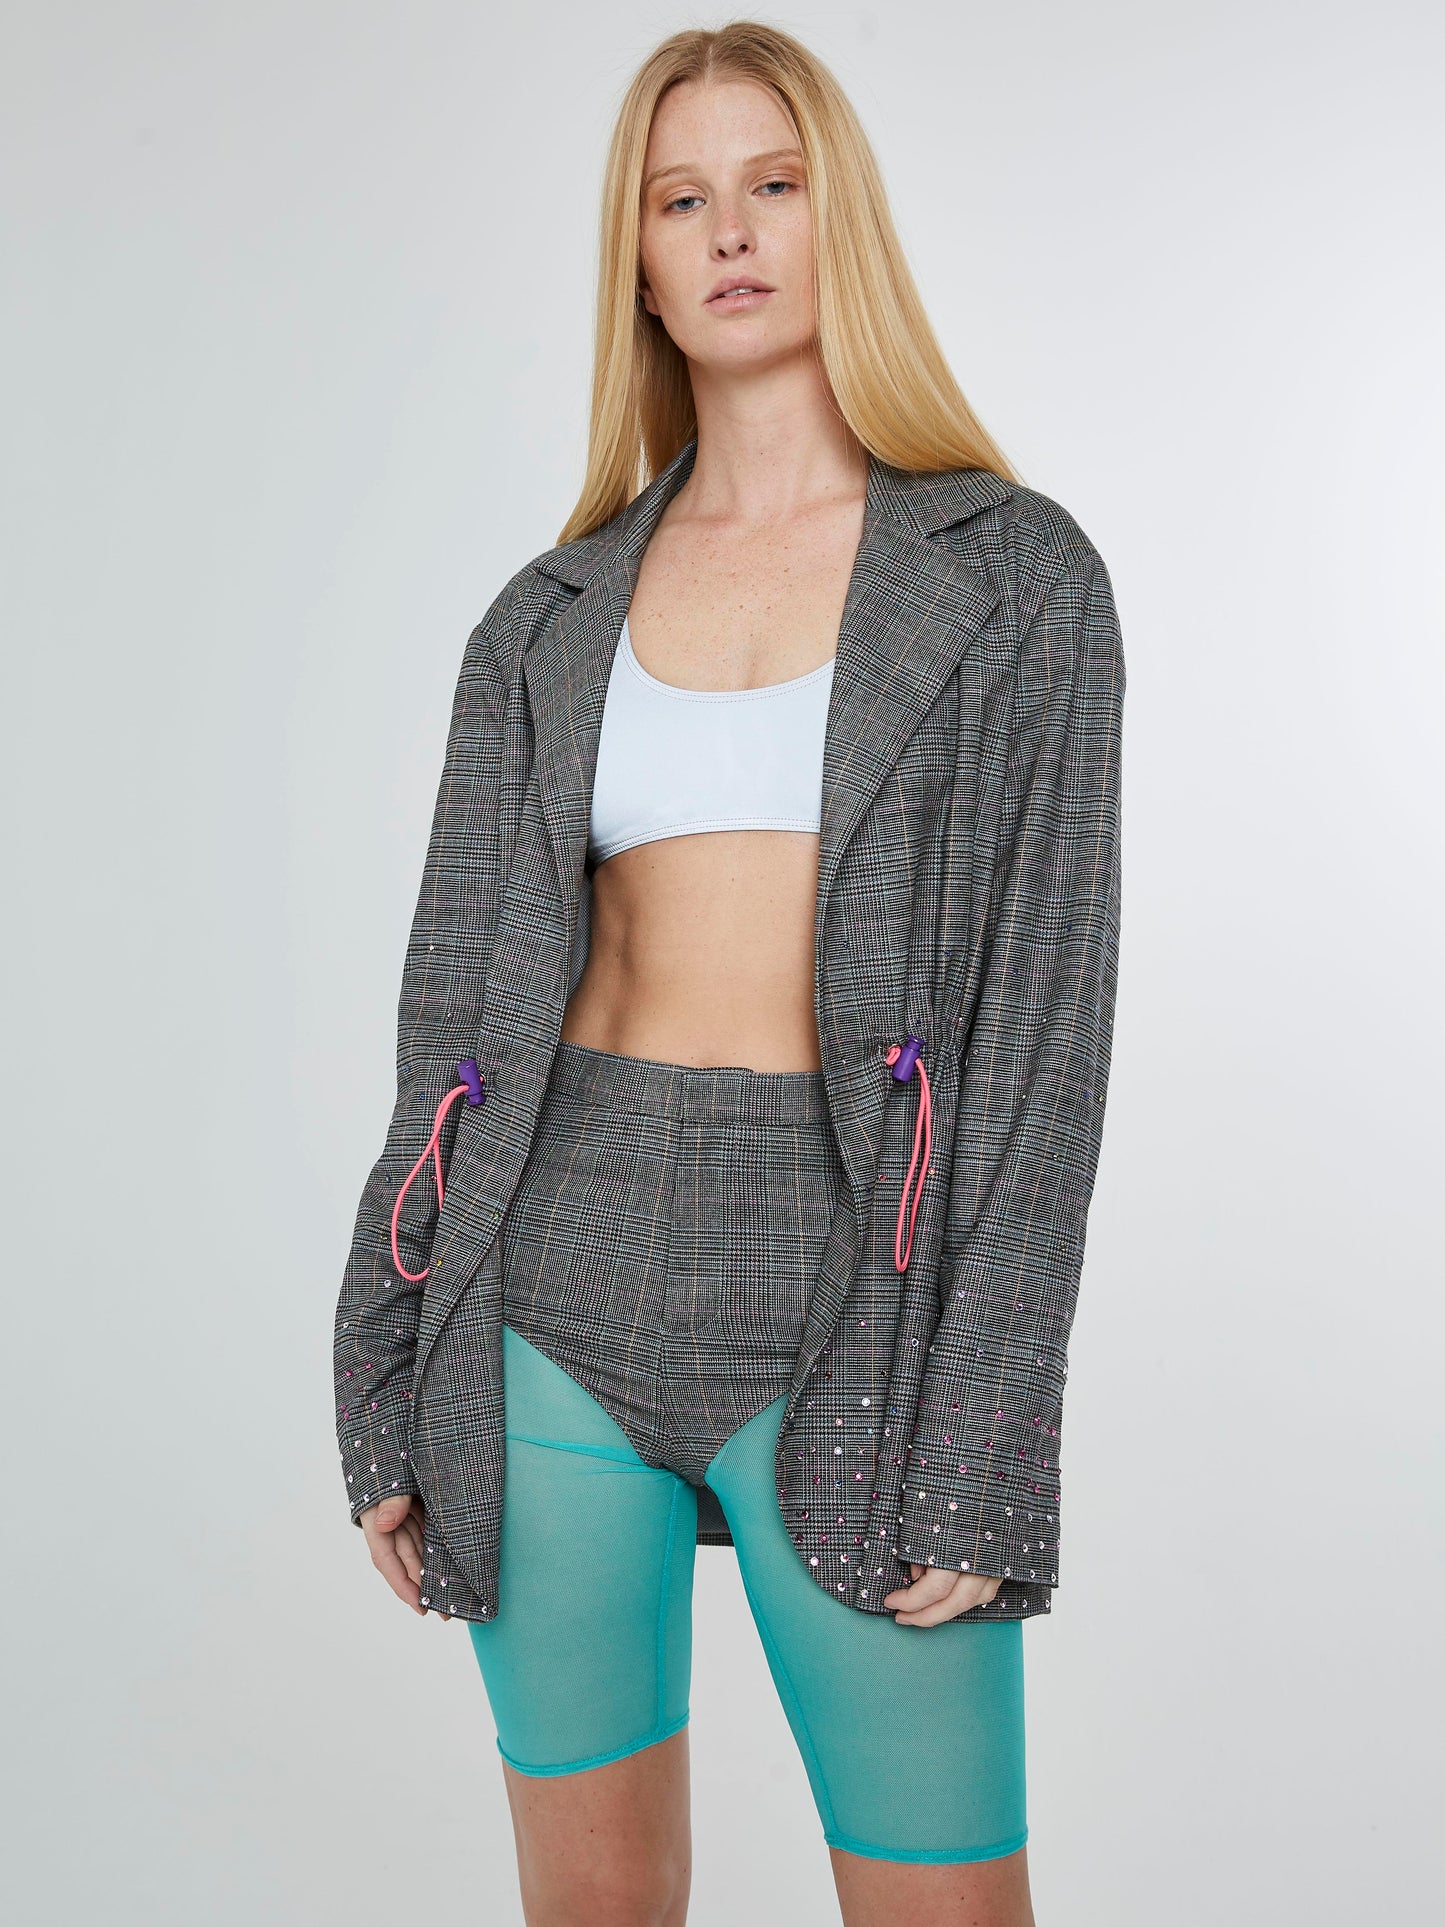 Sporty plaid blazer with multicolored crystals